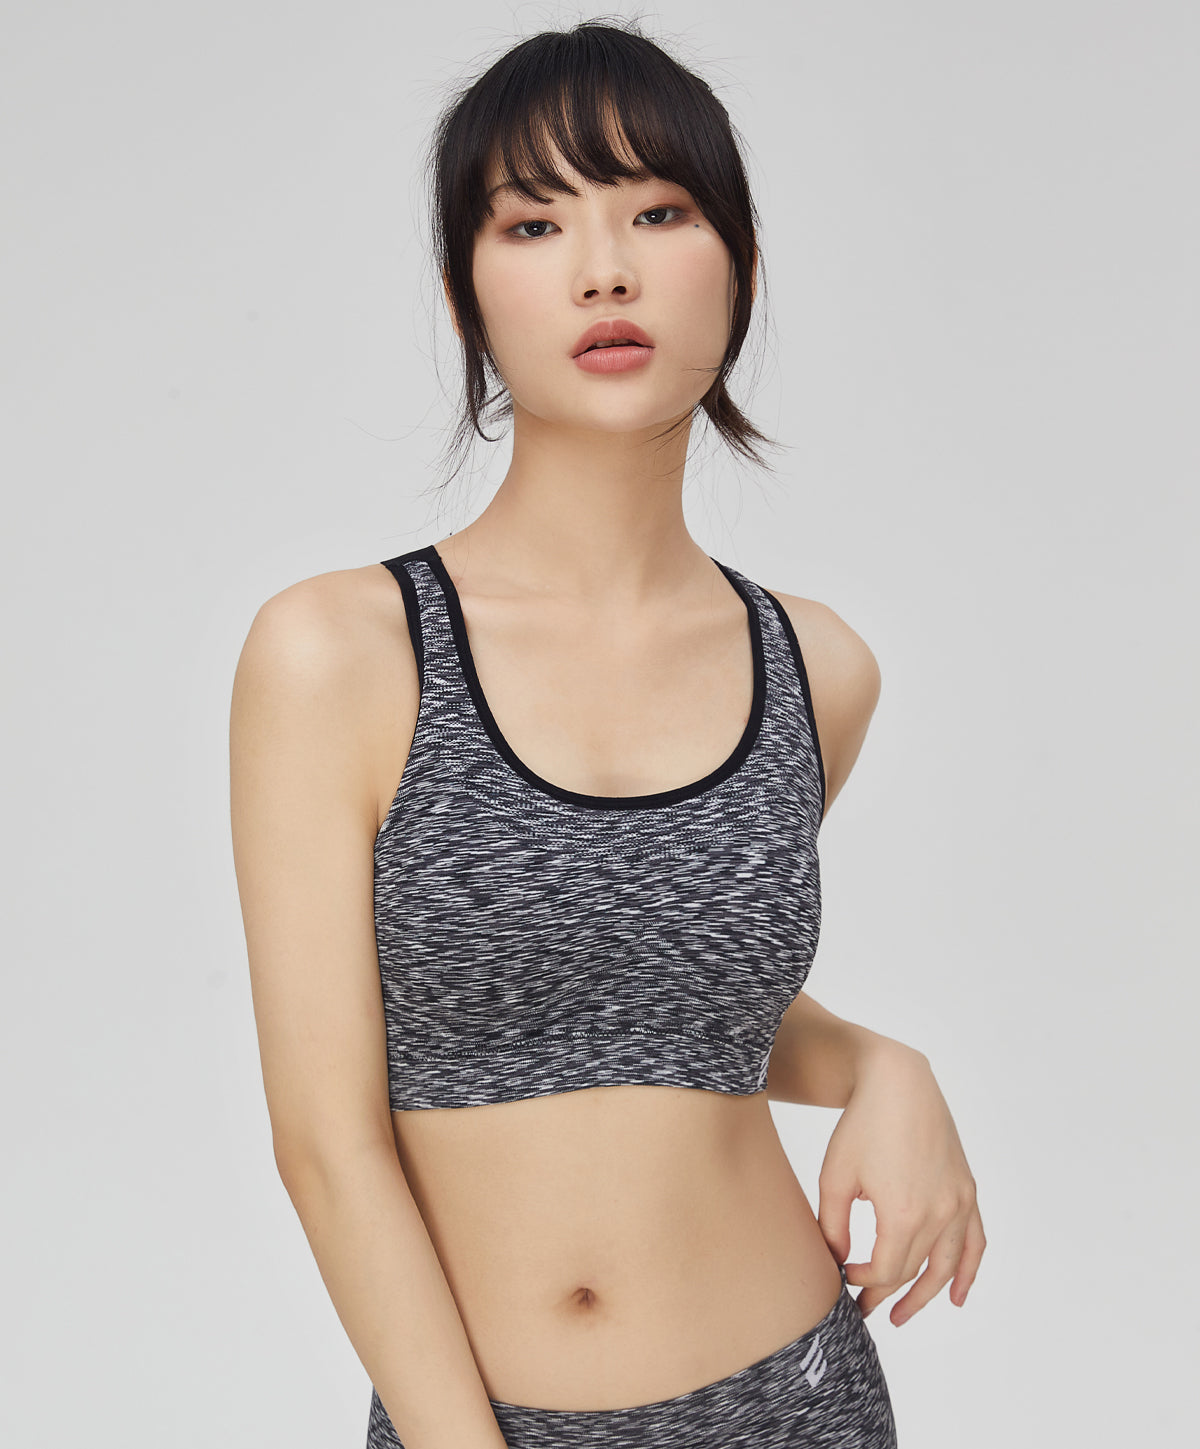 Energize your workouts with Pierre Cardin Lingerie's Sport Collection